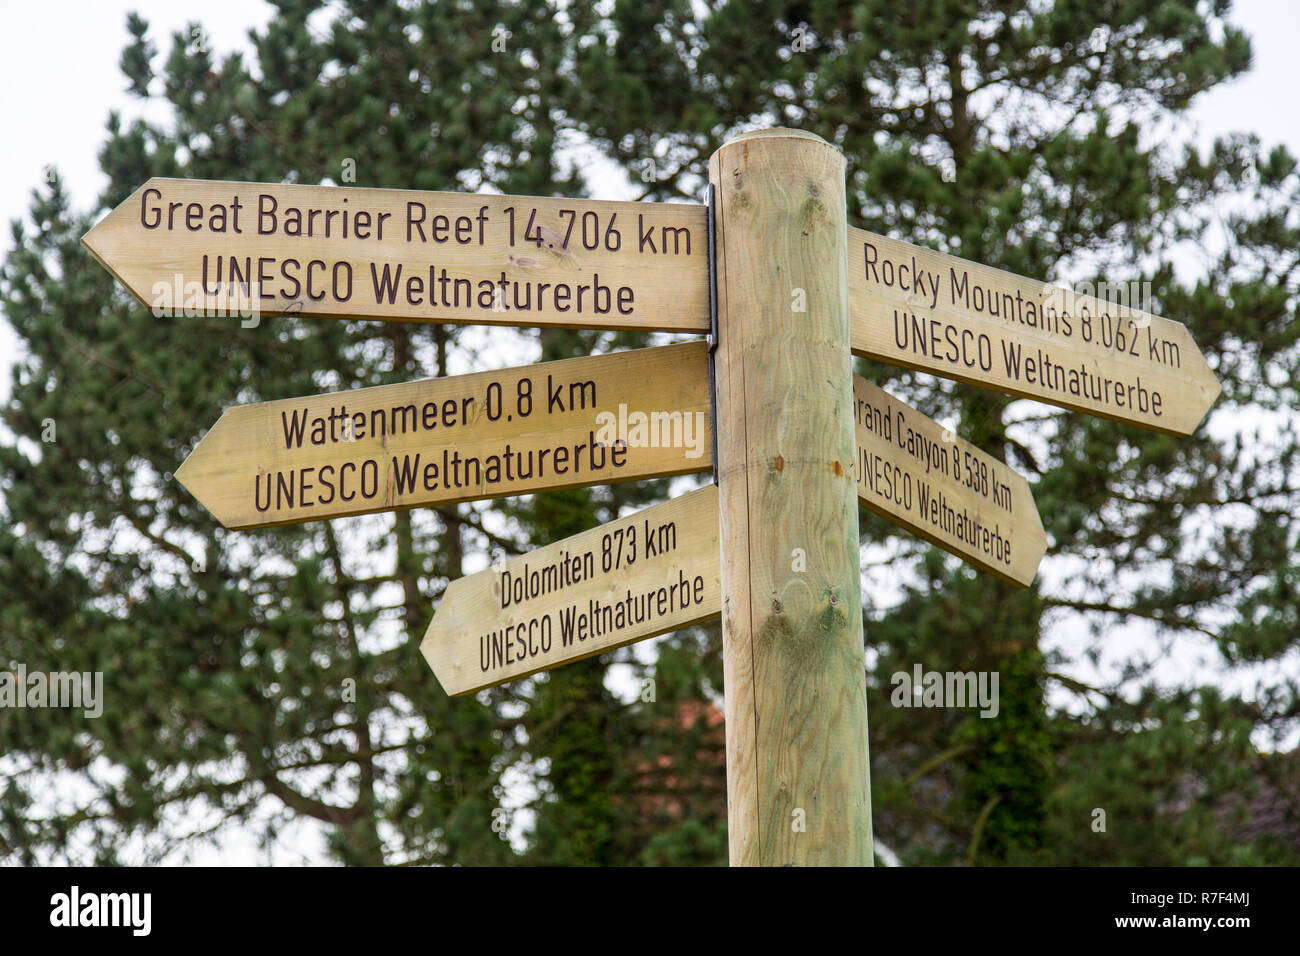 Signposts pointing to various UNESCO World Heritage Sites, Spiekeroog, East Frisia, Lower Saxony, Germany Stock Photo